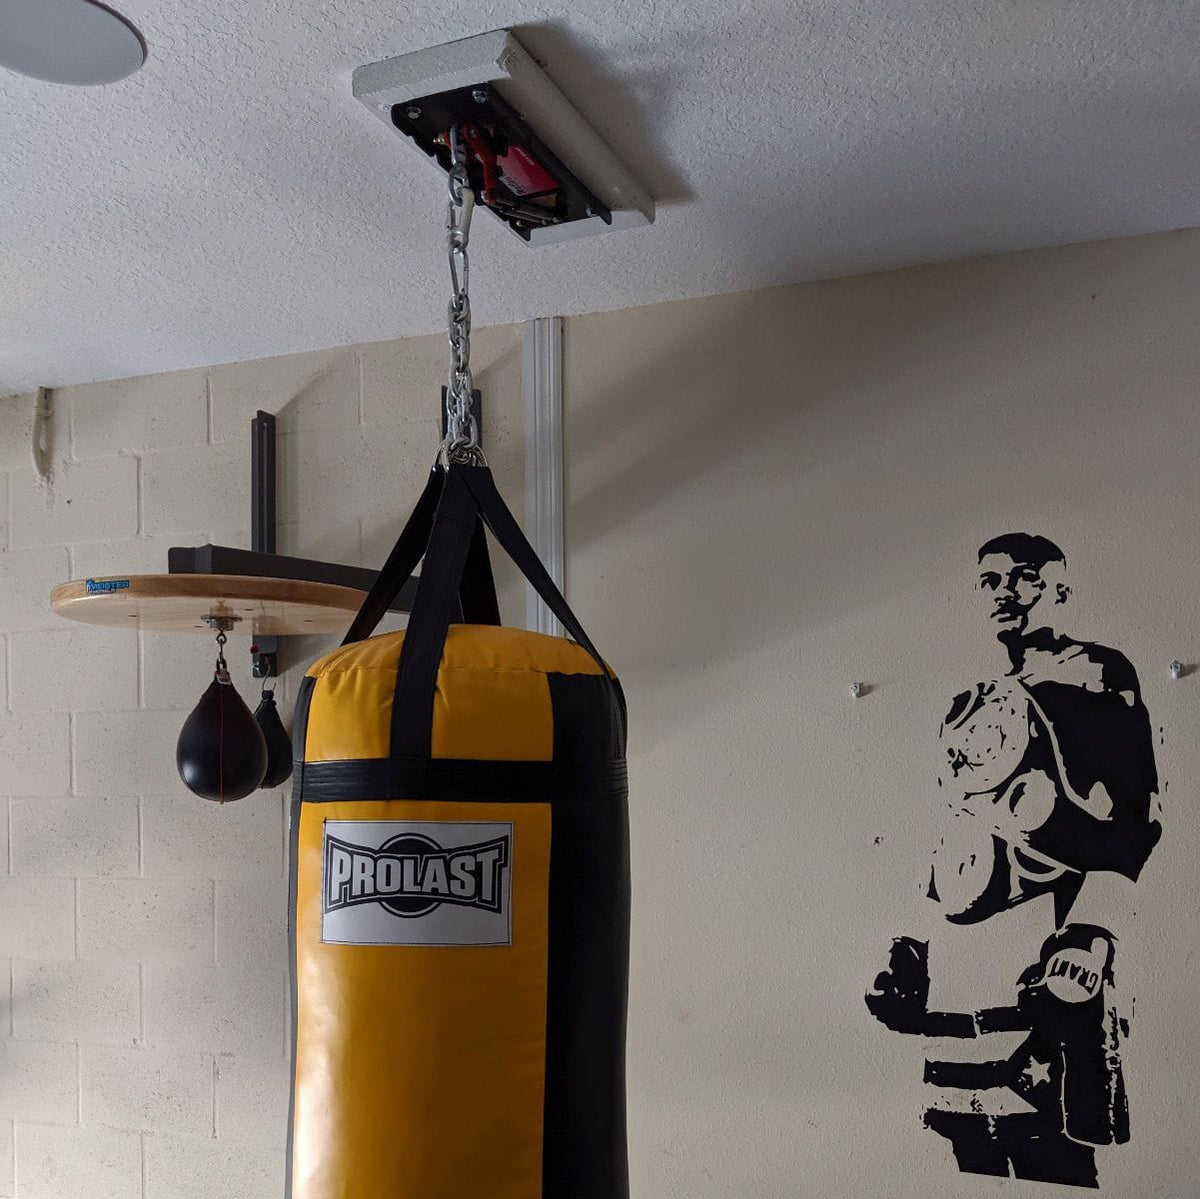 Hot Selling I Beam Heavy Hanger Adjustable Ceiling Mount Bag Rack For Boxing  Buy I Beam Heavy Boxing Bag Hanger,Ceiling Mount Boxing Bag Rack,Boxing Bag  Mounting System Product On | lupon.gov.ph